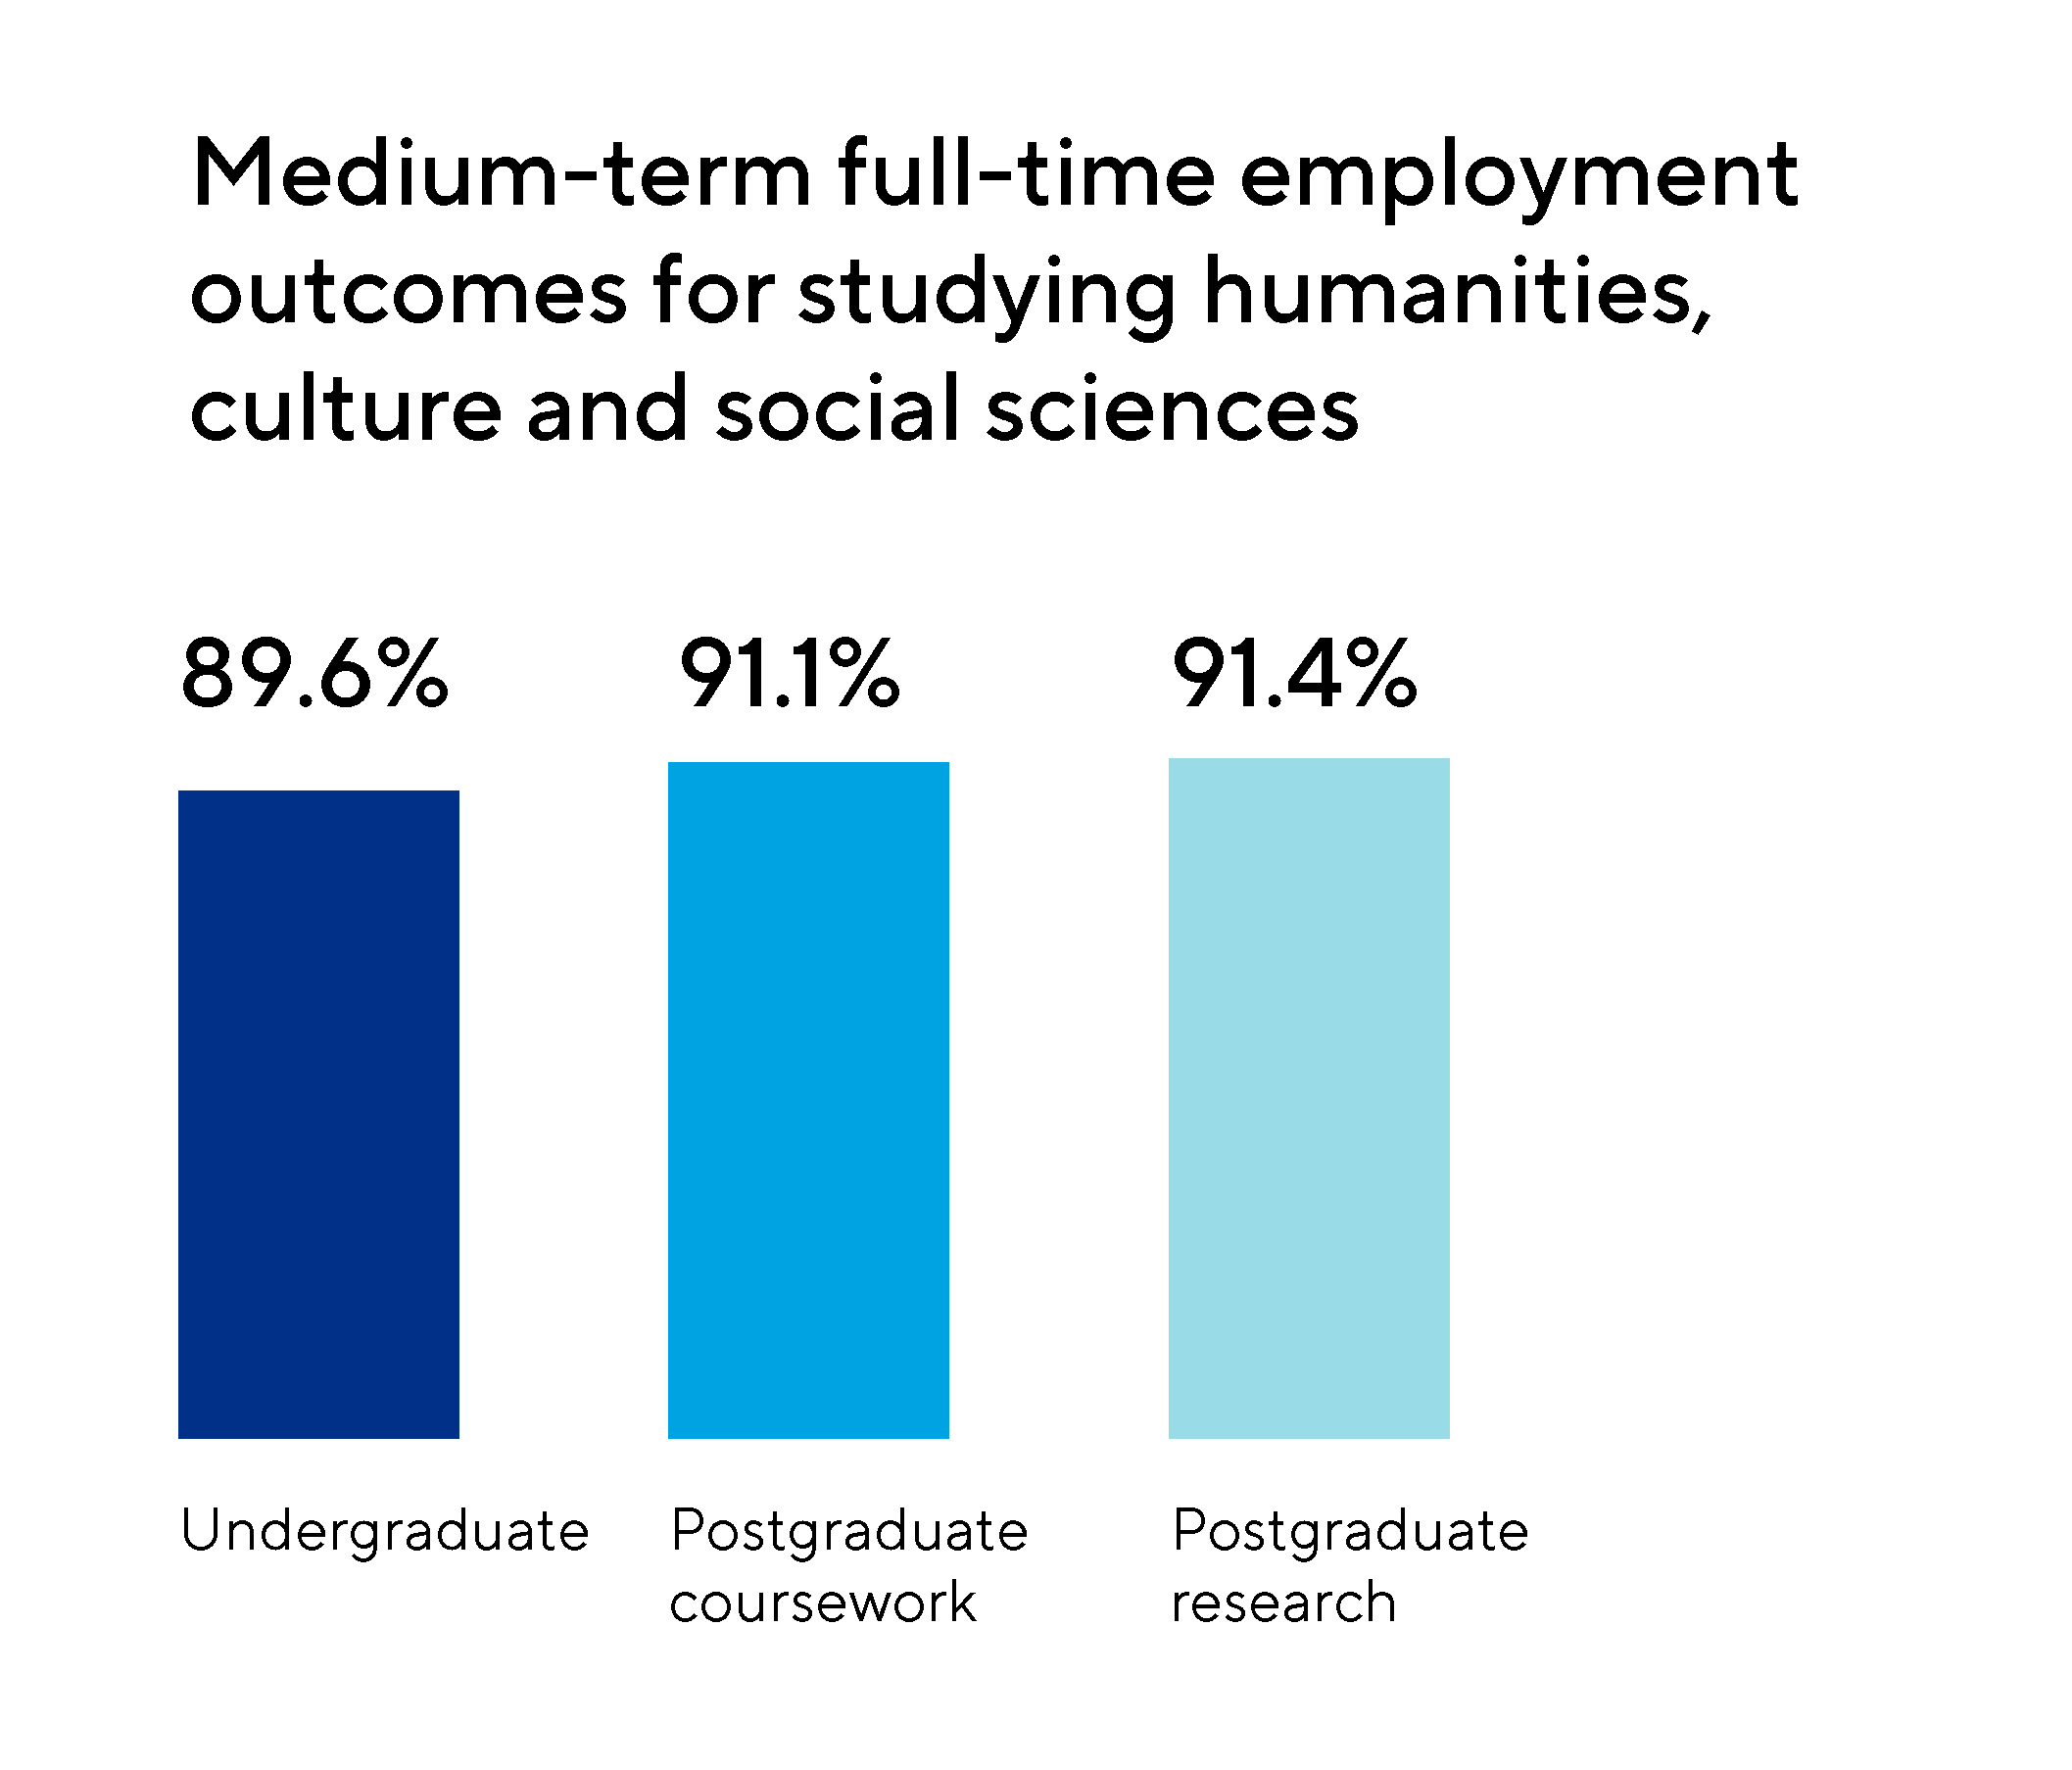 Image of a graph displaying the medium-term full-term employment outcomes for studying humanities, culture and social sciences with 89.6% allocated to undergraduate, 91.1% allocated to postgraduate coursework and 91.4% allocated to postgraduate research